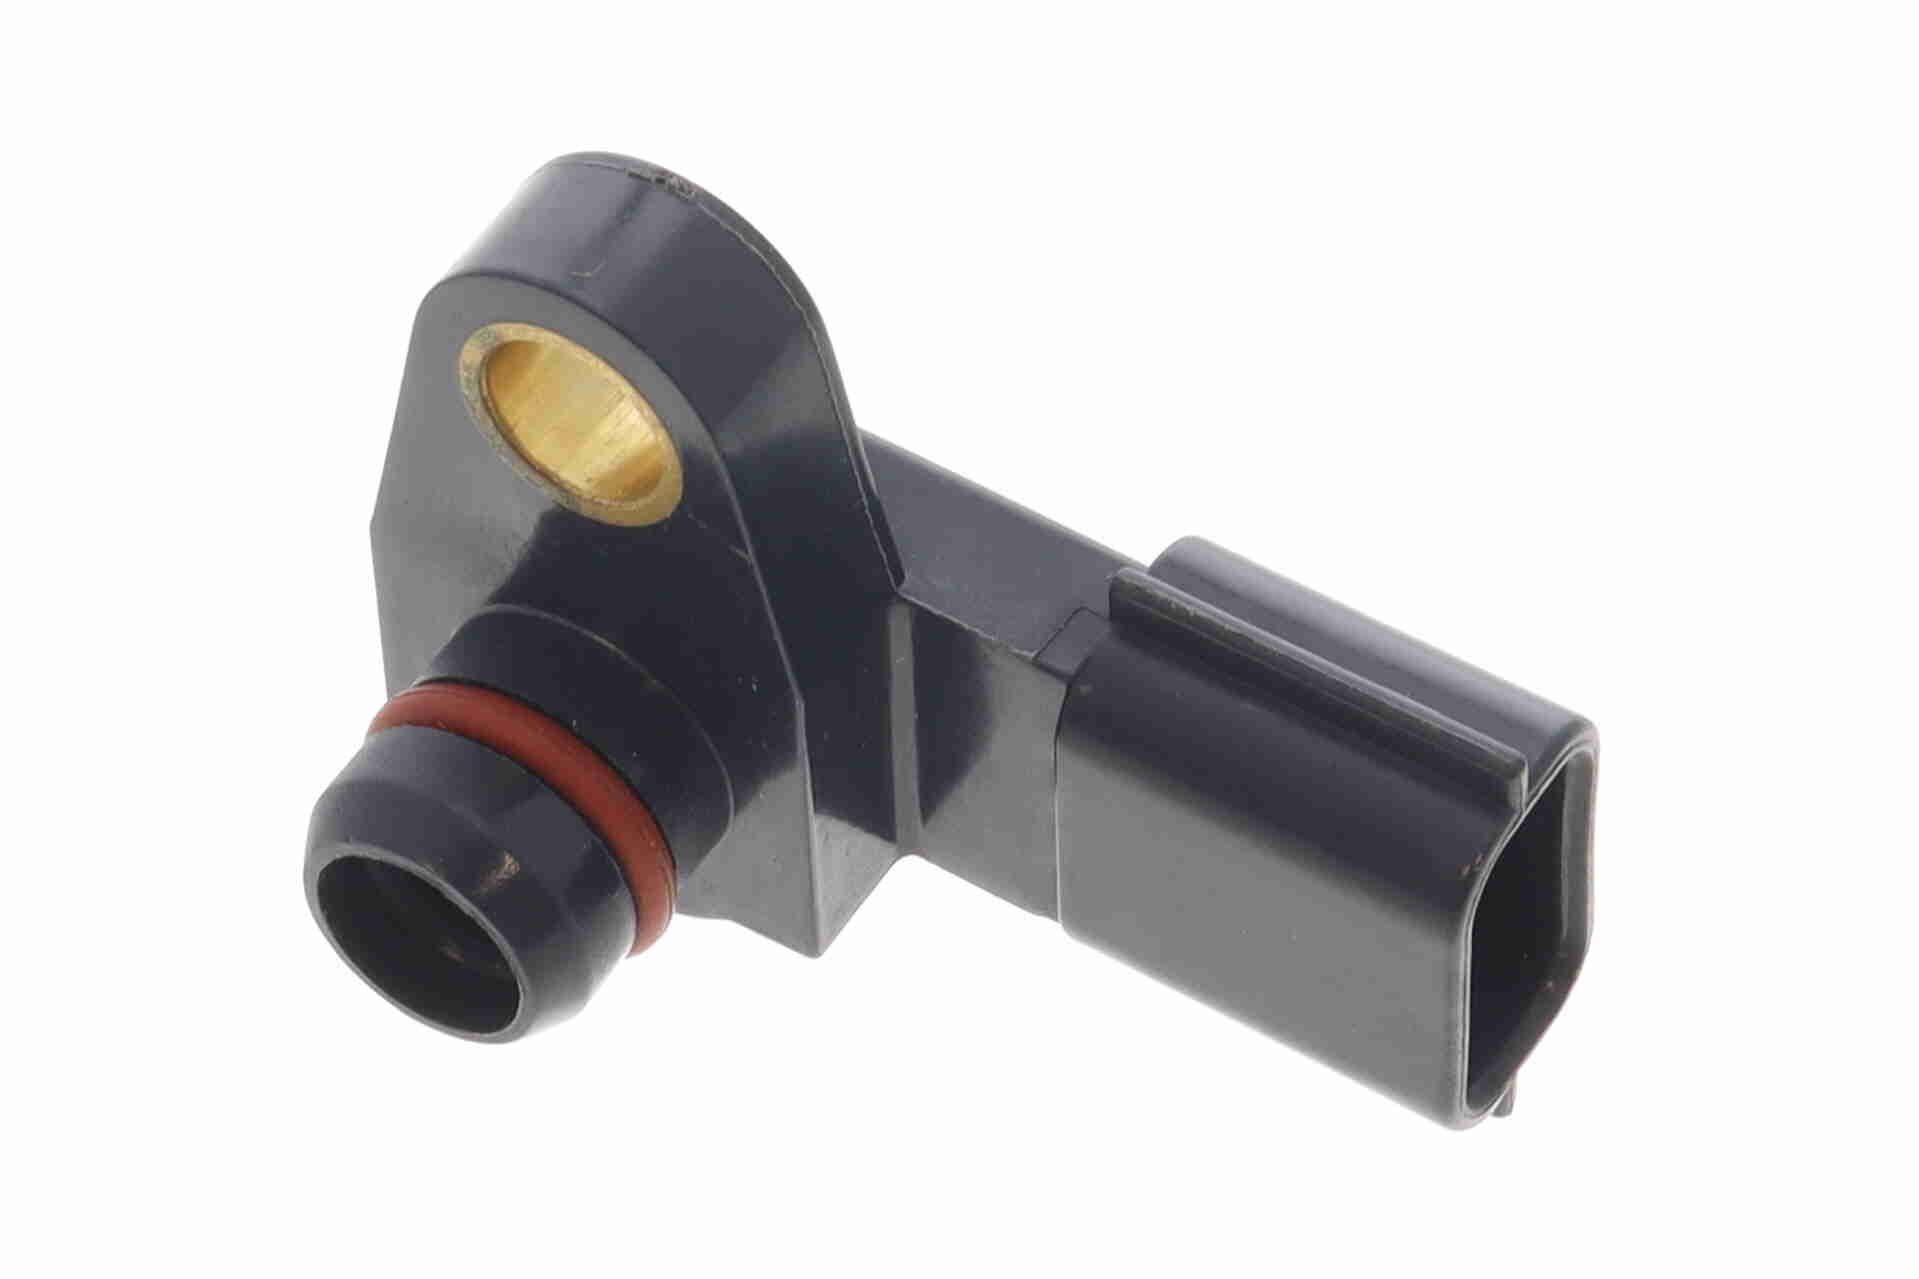 VEV38-72-0275 - 22365- VEMO with seal ring Number of pins: 3-pin connector MAP sensor V38-72-0275 buy